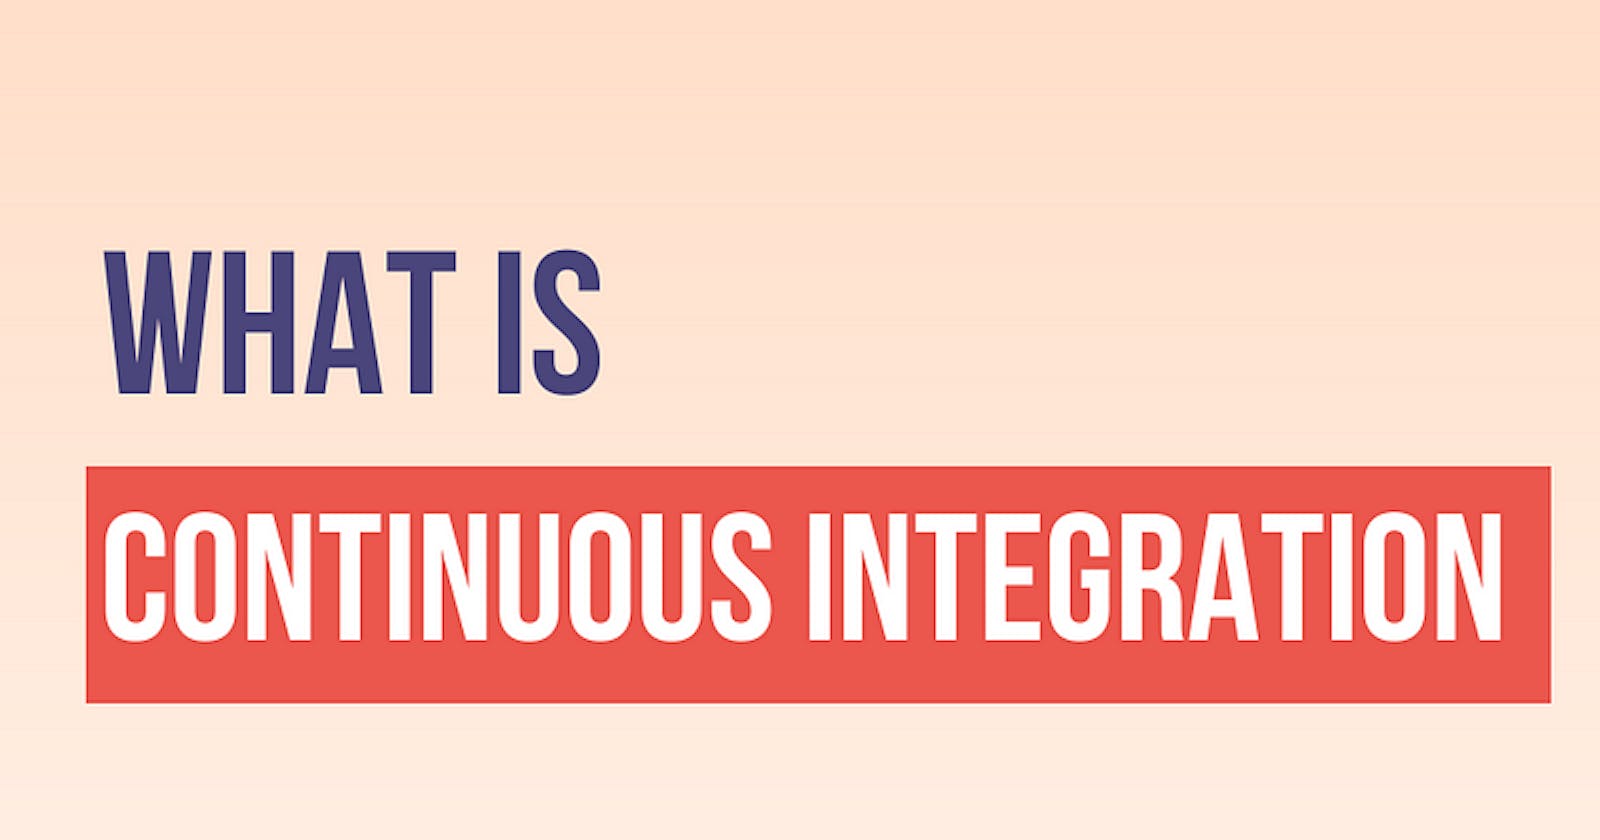 What is Continuous Integration?